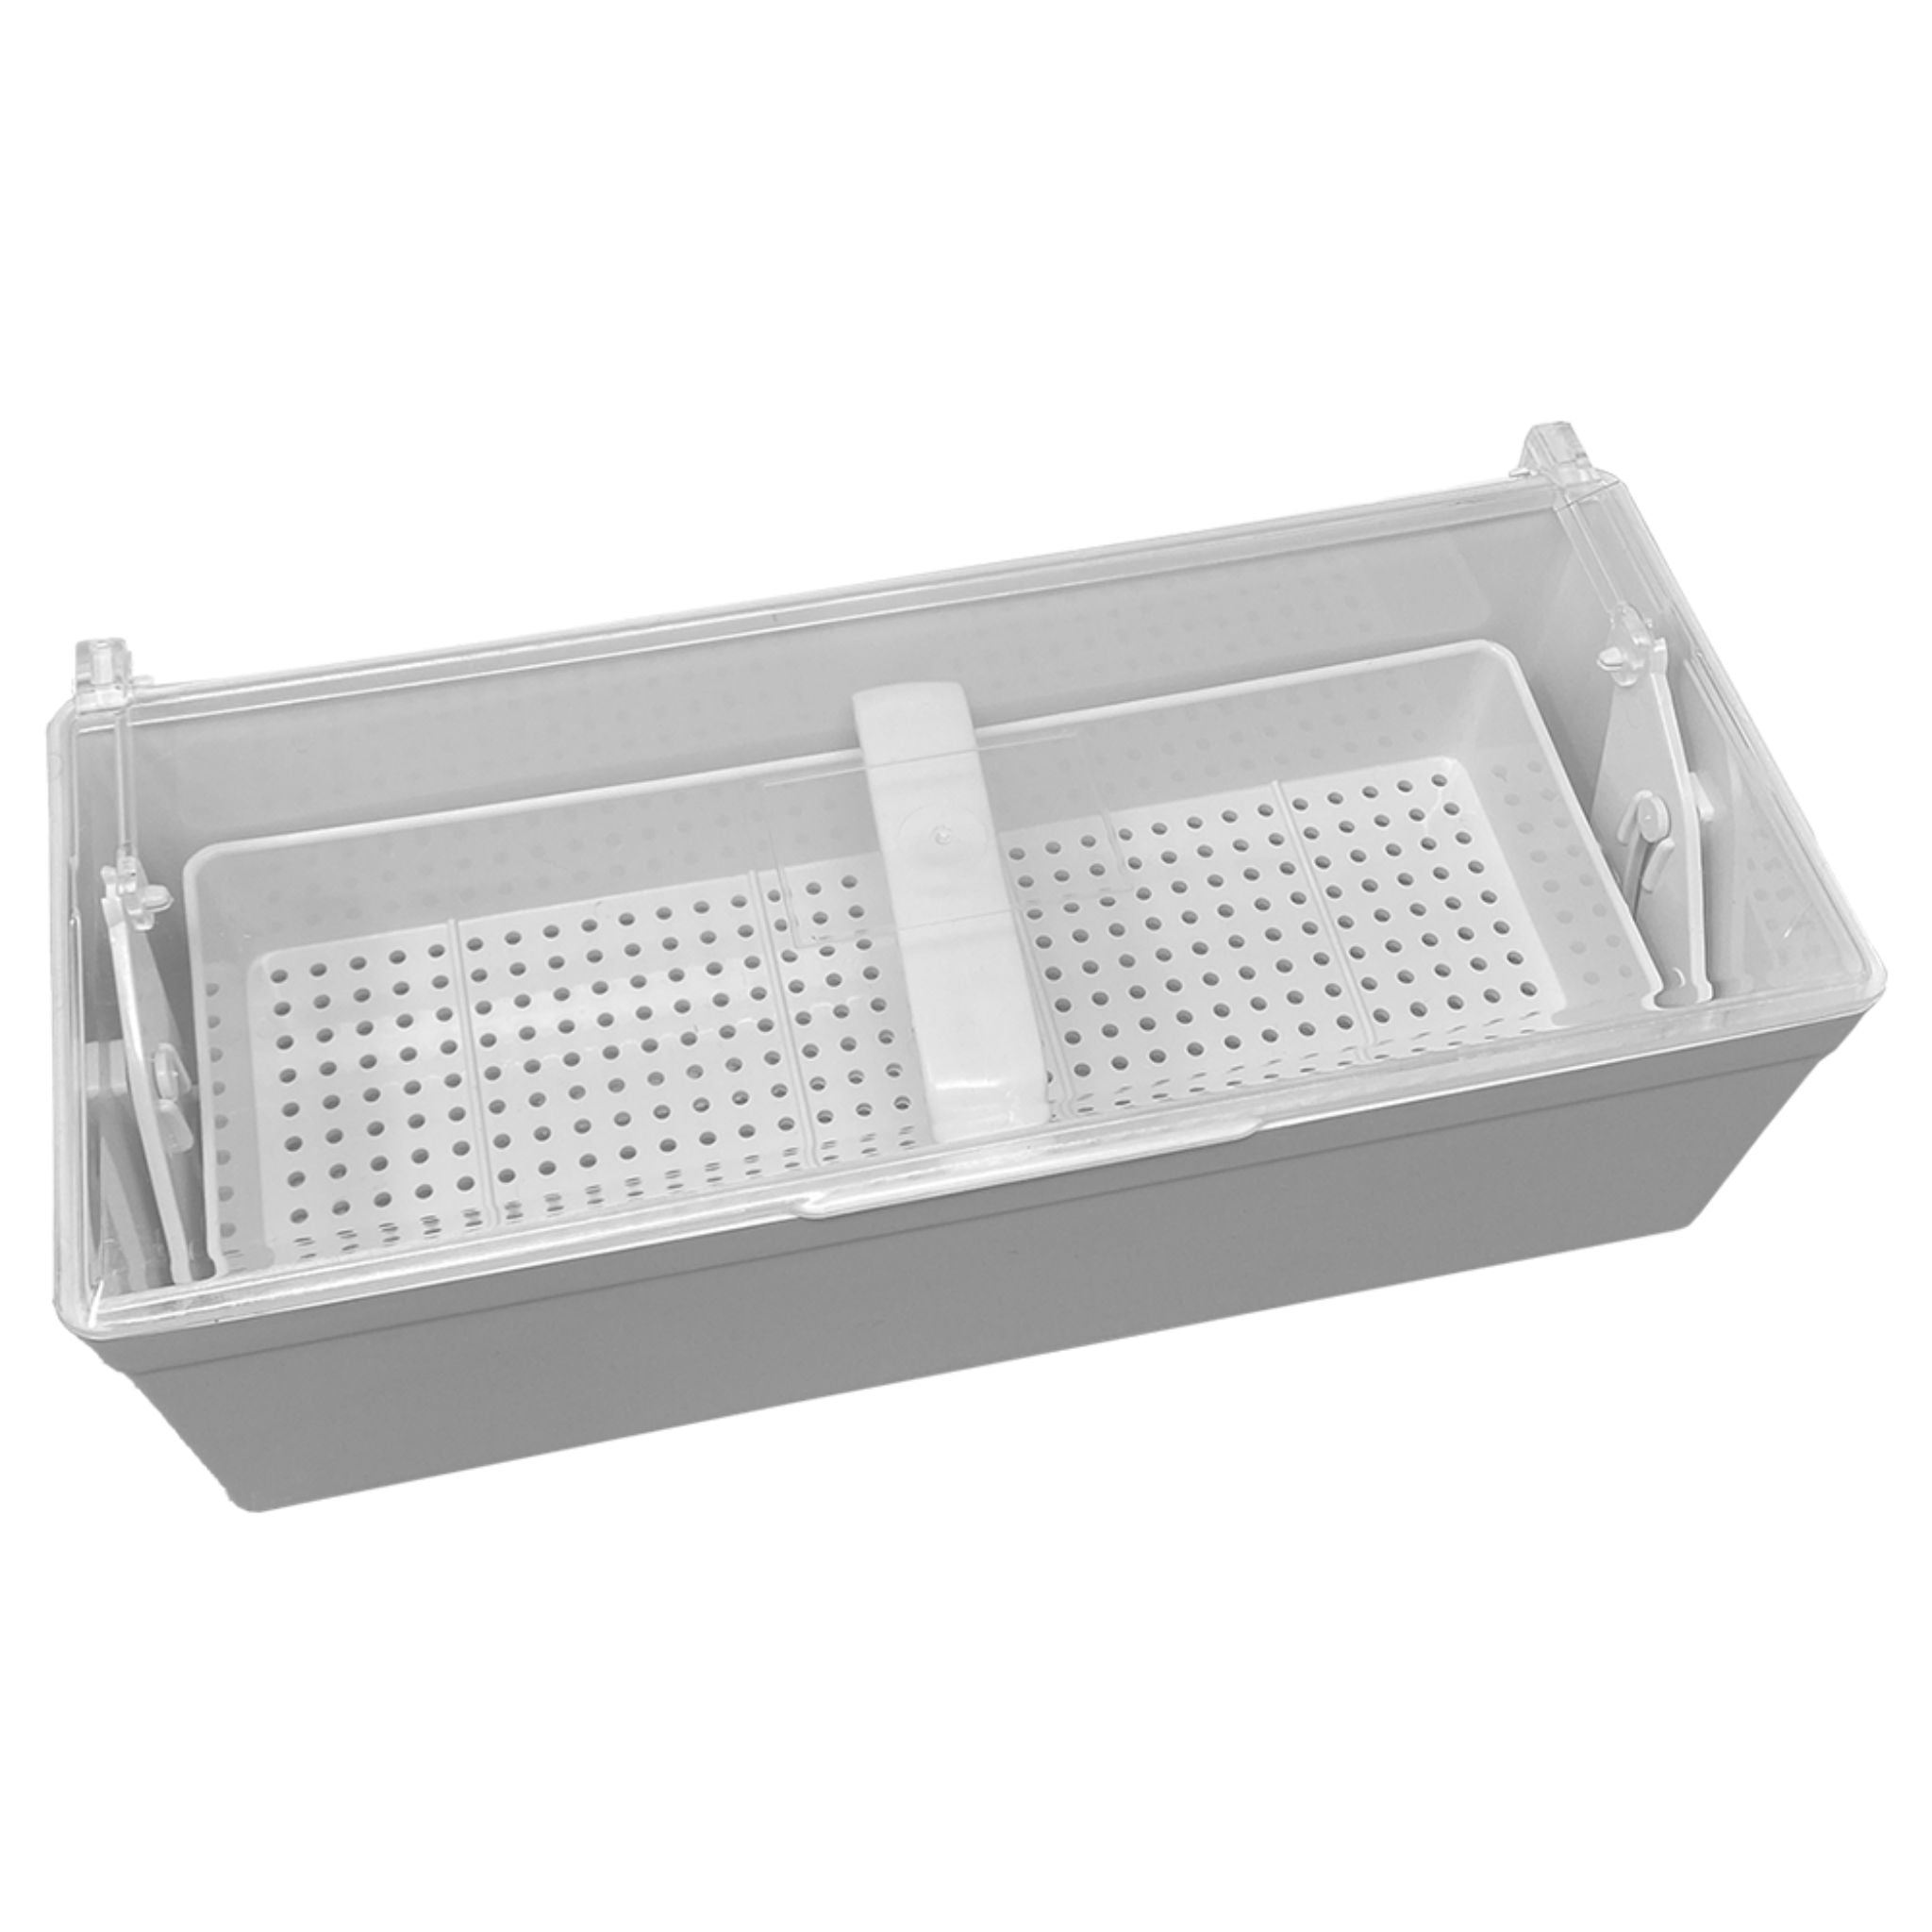 Disinfection tray for instruments - 0